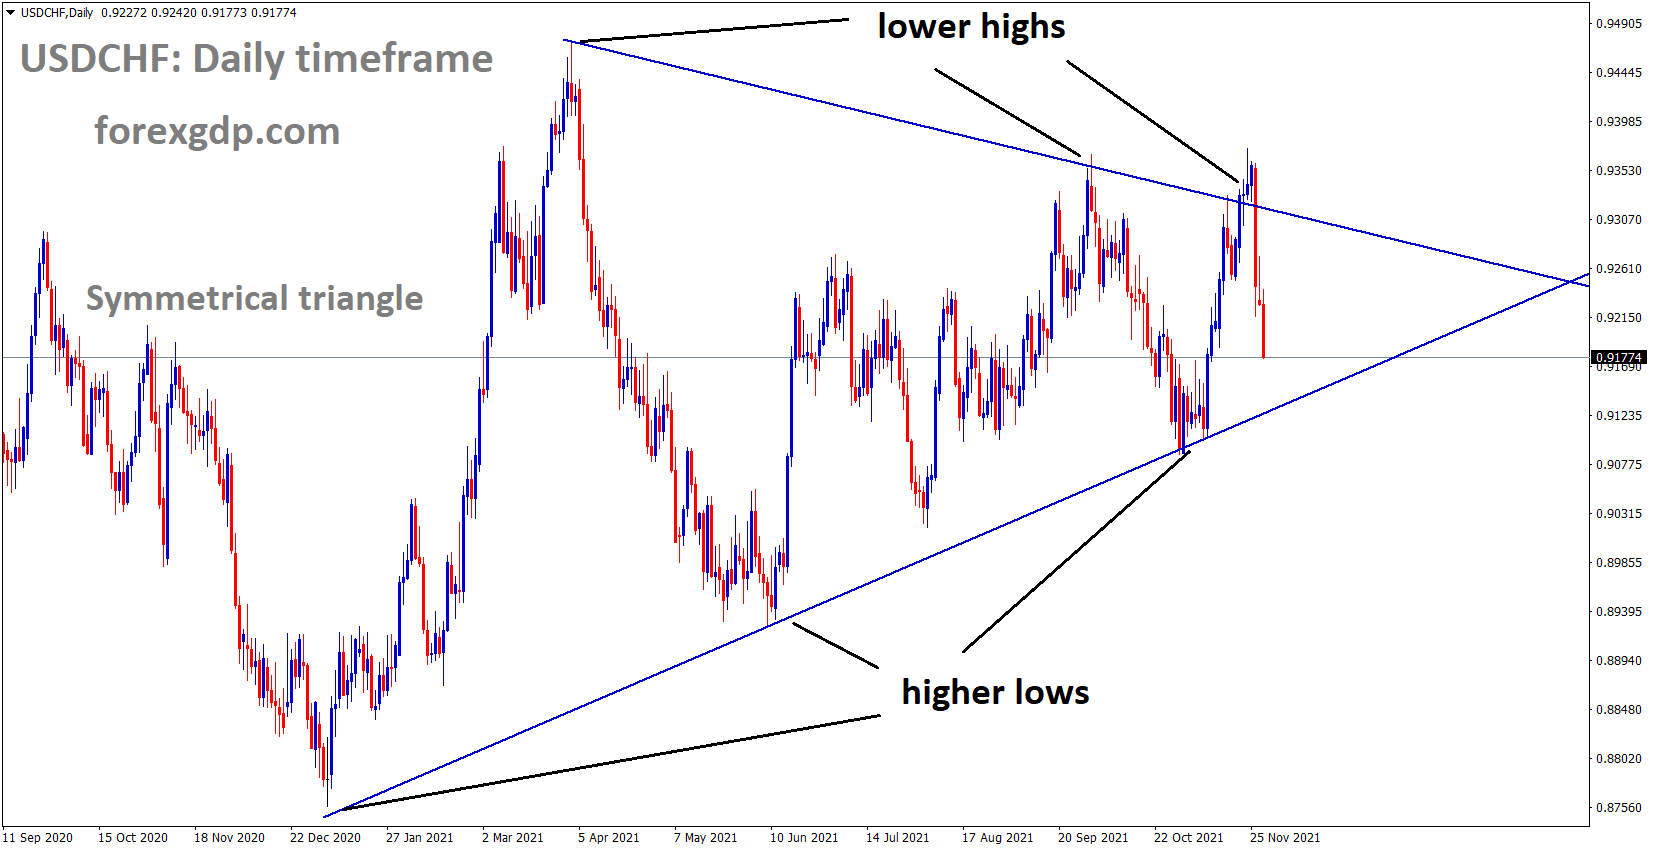 USDCHF is moving in the Symmetrical triangle pattern and the market moving near to the bottom of the triangle pattern